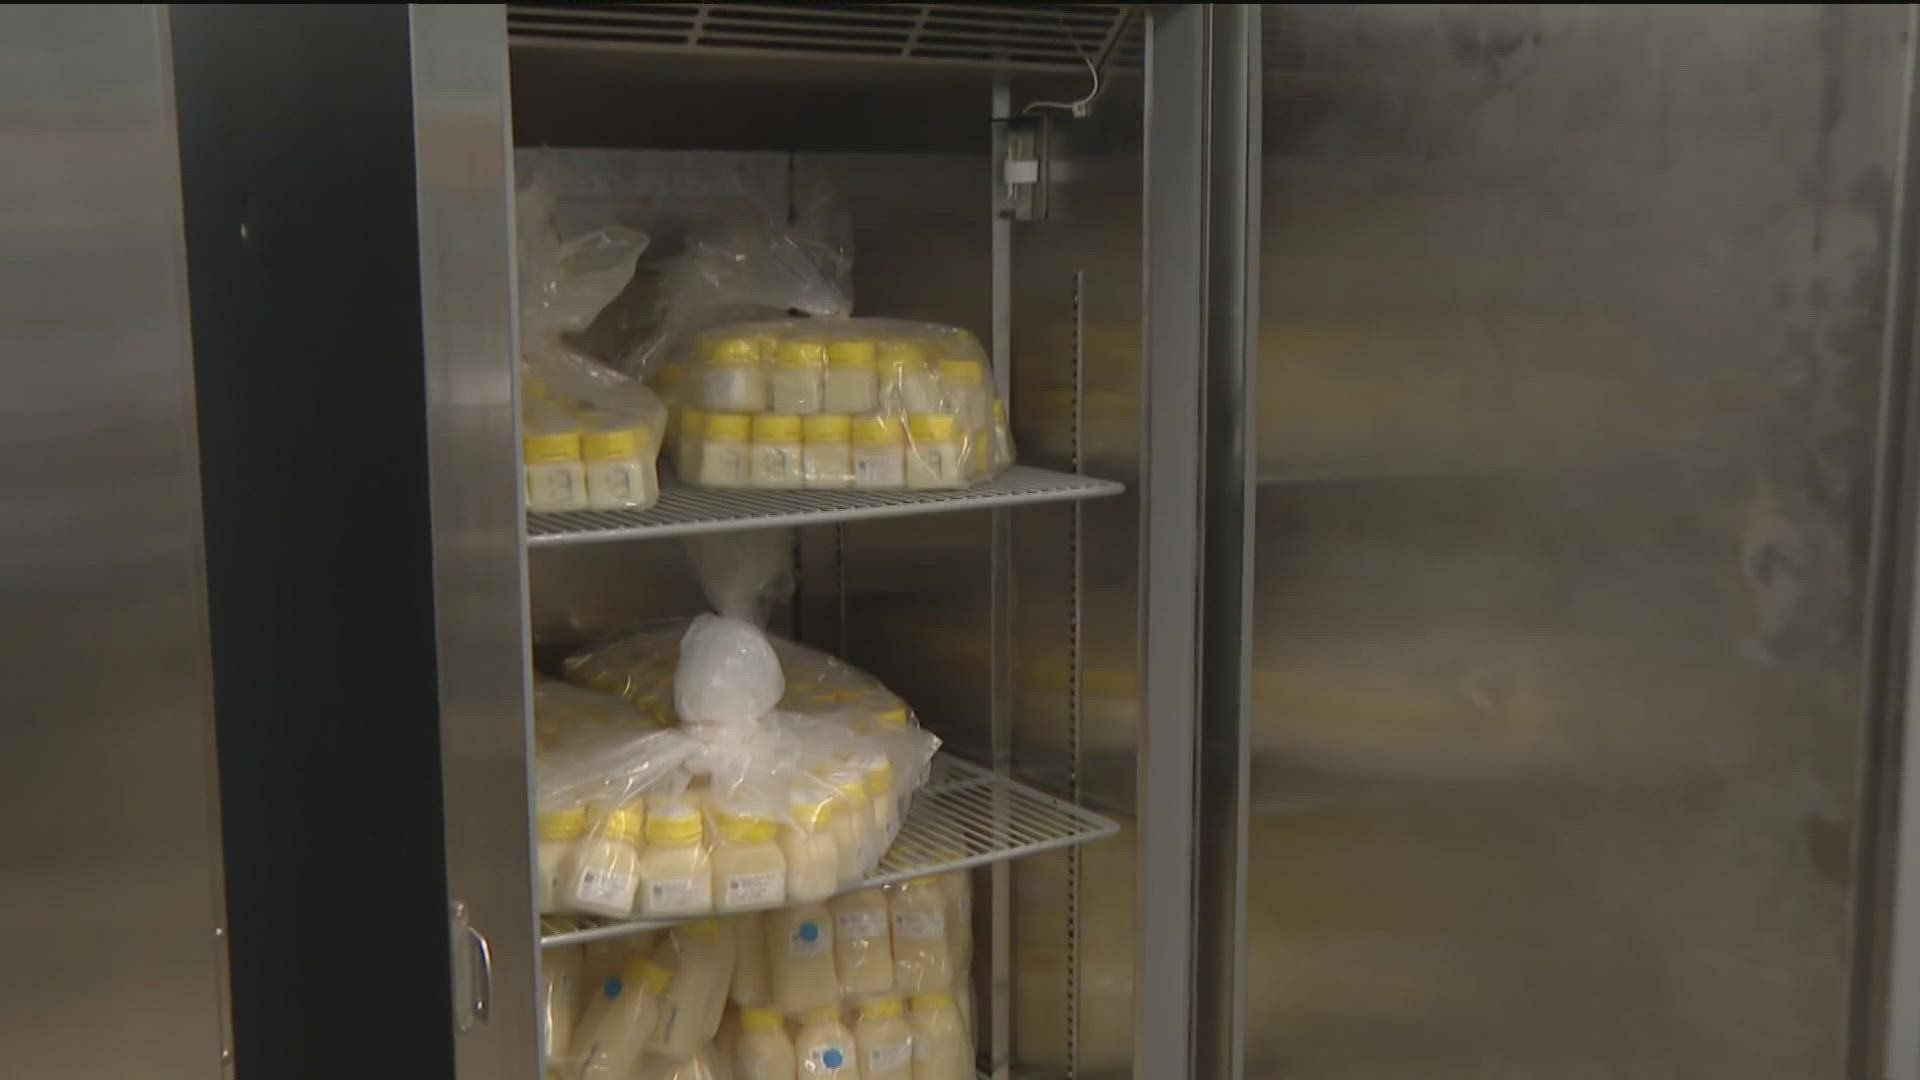 UC San Diego runs one of very few milk banks across the country.